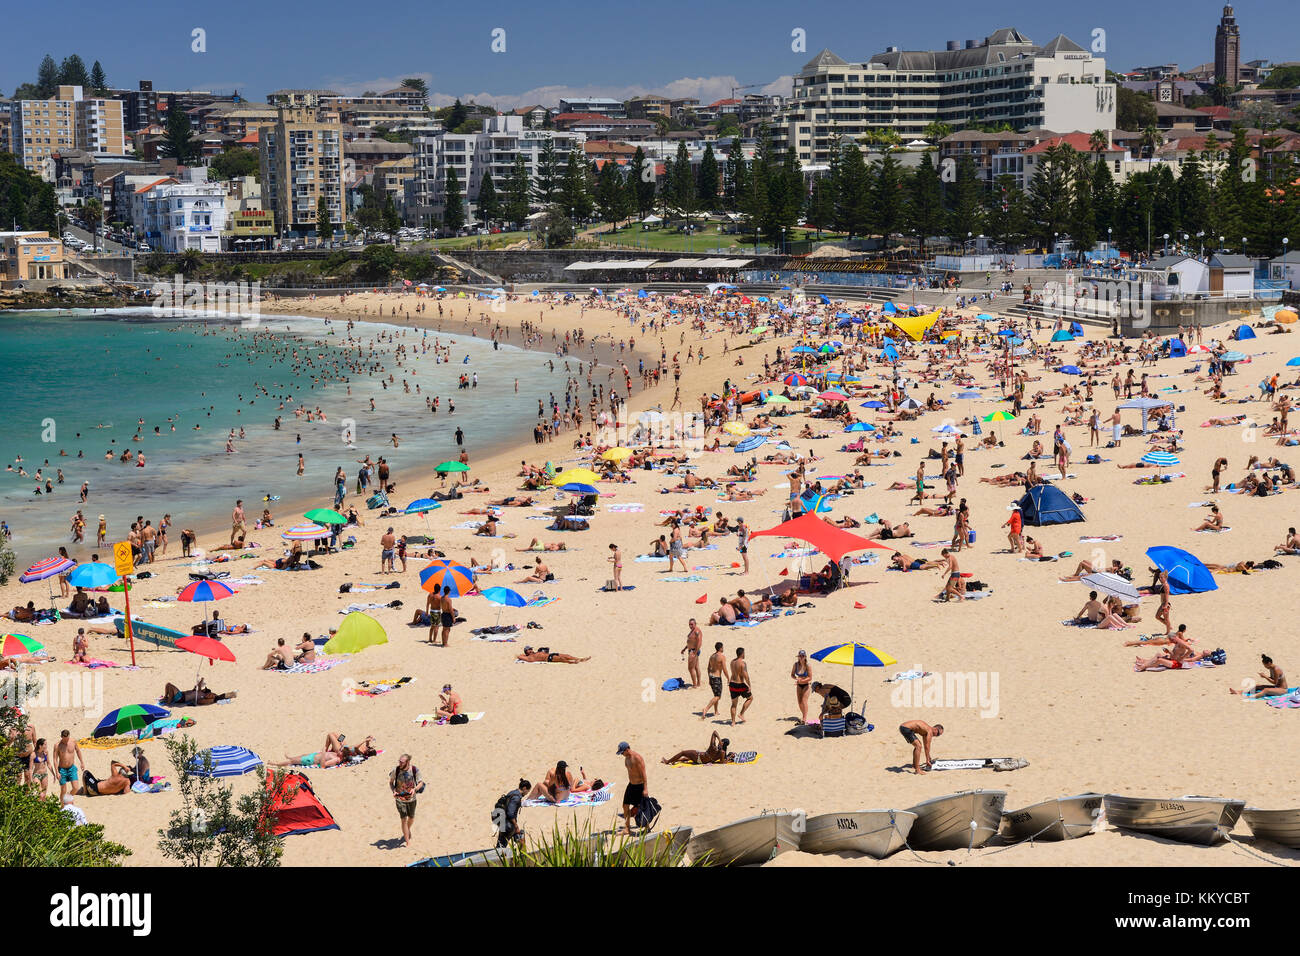 Sunbathers on Coogee Beach, Coogee, an eastern suburb of Sydney, New South Wales, Australia Stock Photo